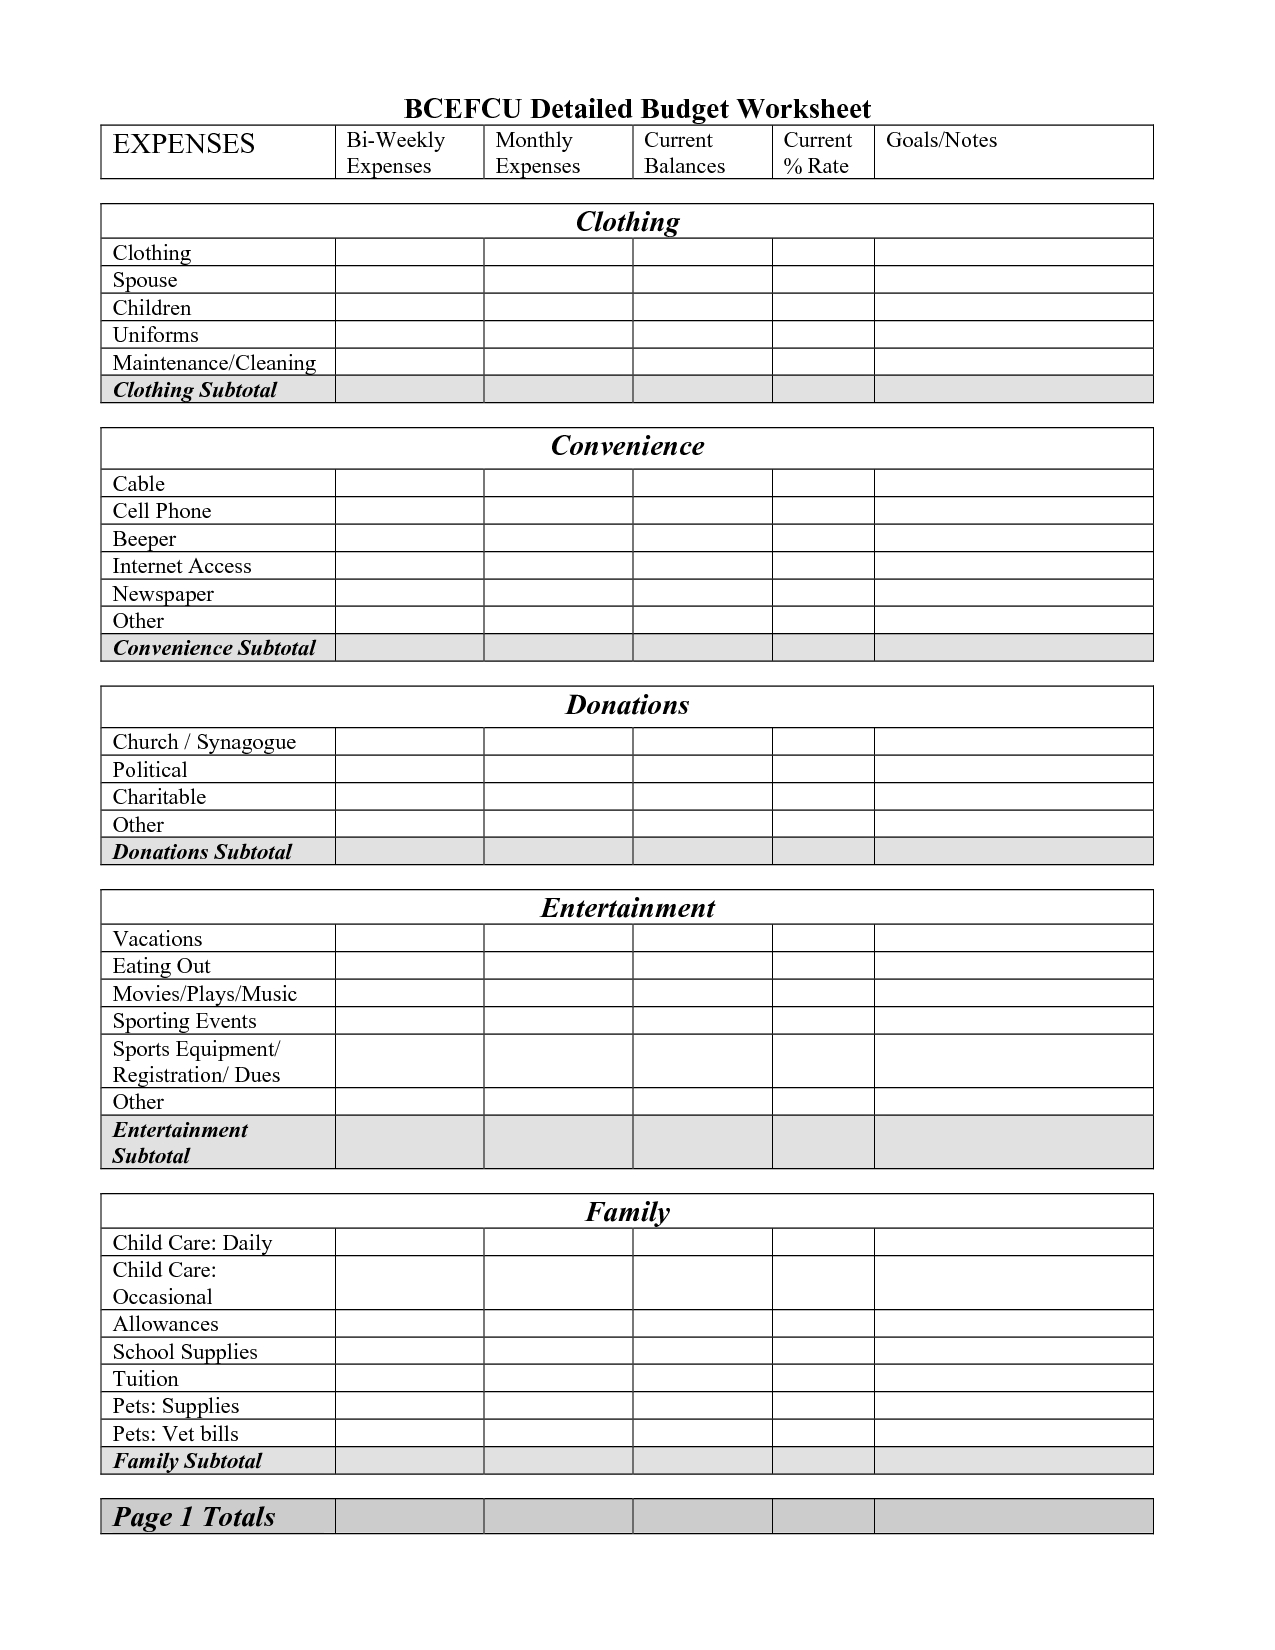 Monthly Budget Preadsheet Free Printable Worksheet Detailed Family Within Printable Budget Worksheet Dave Ramsey